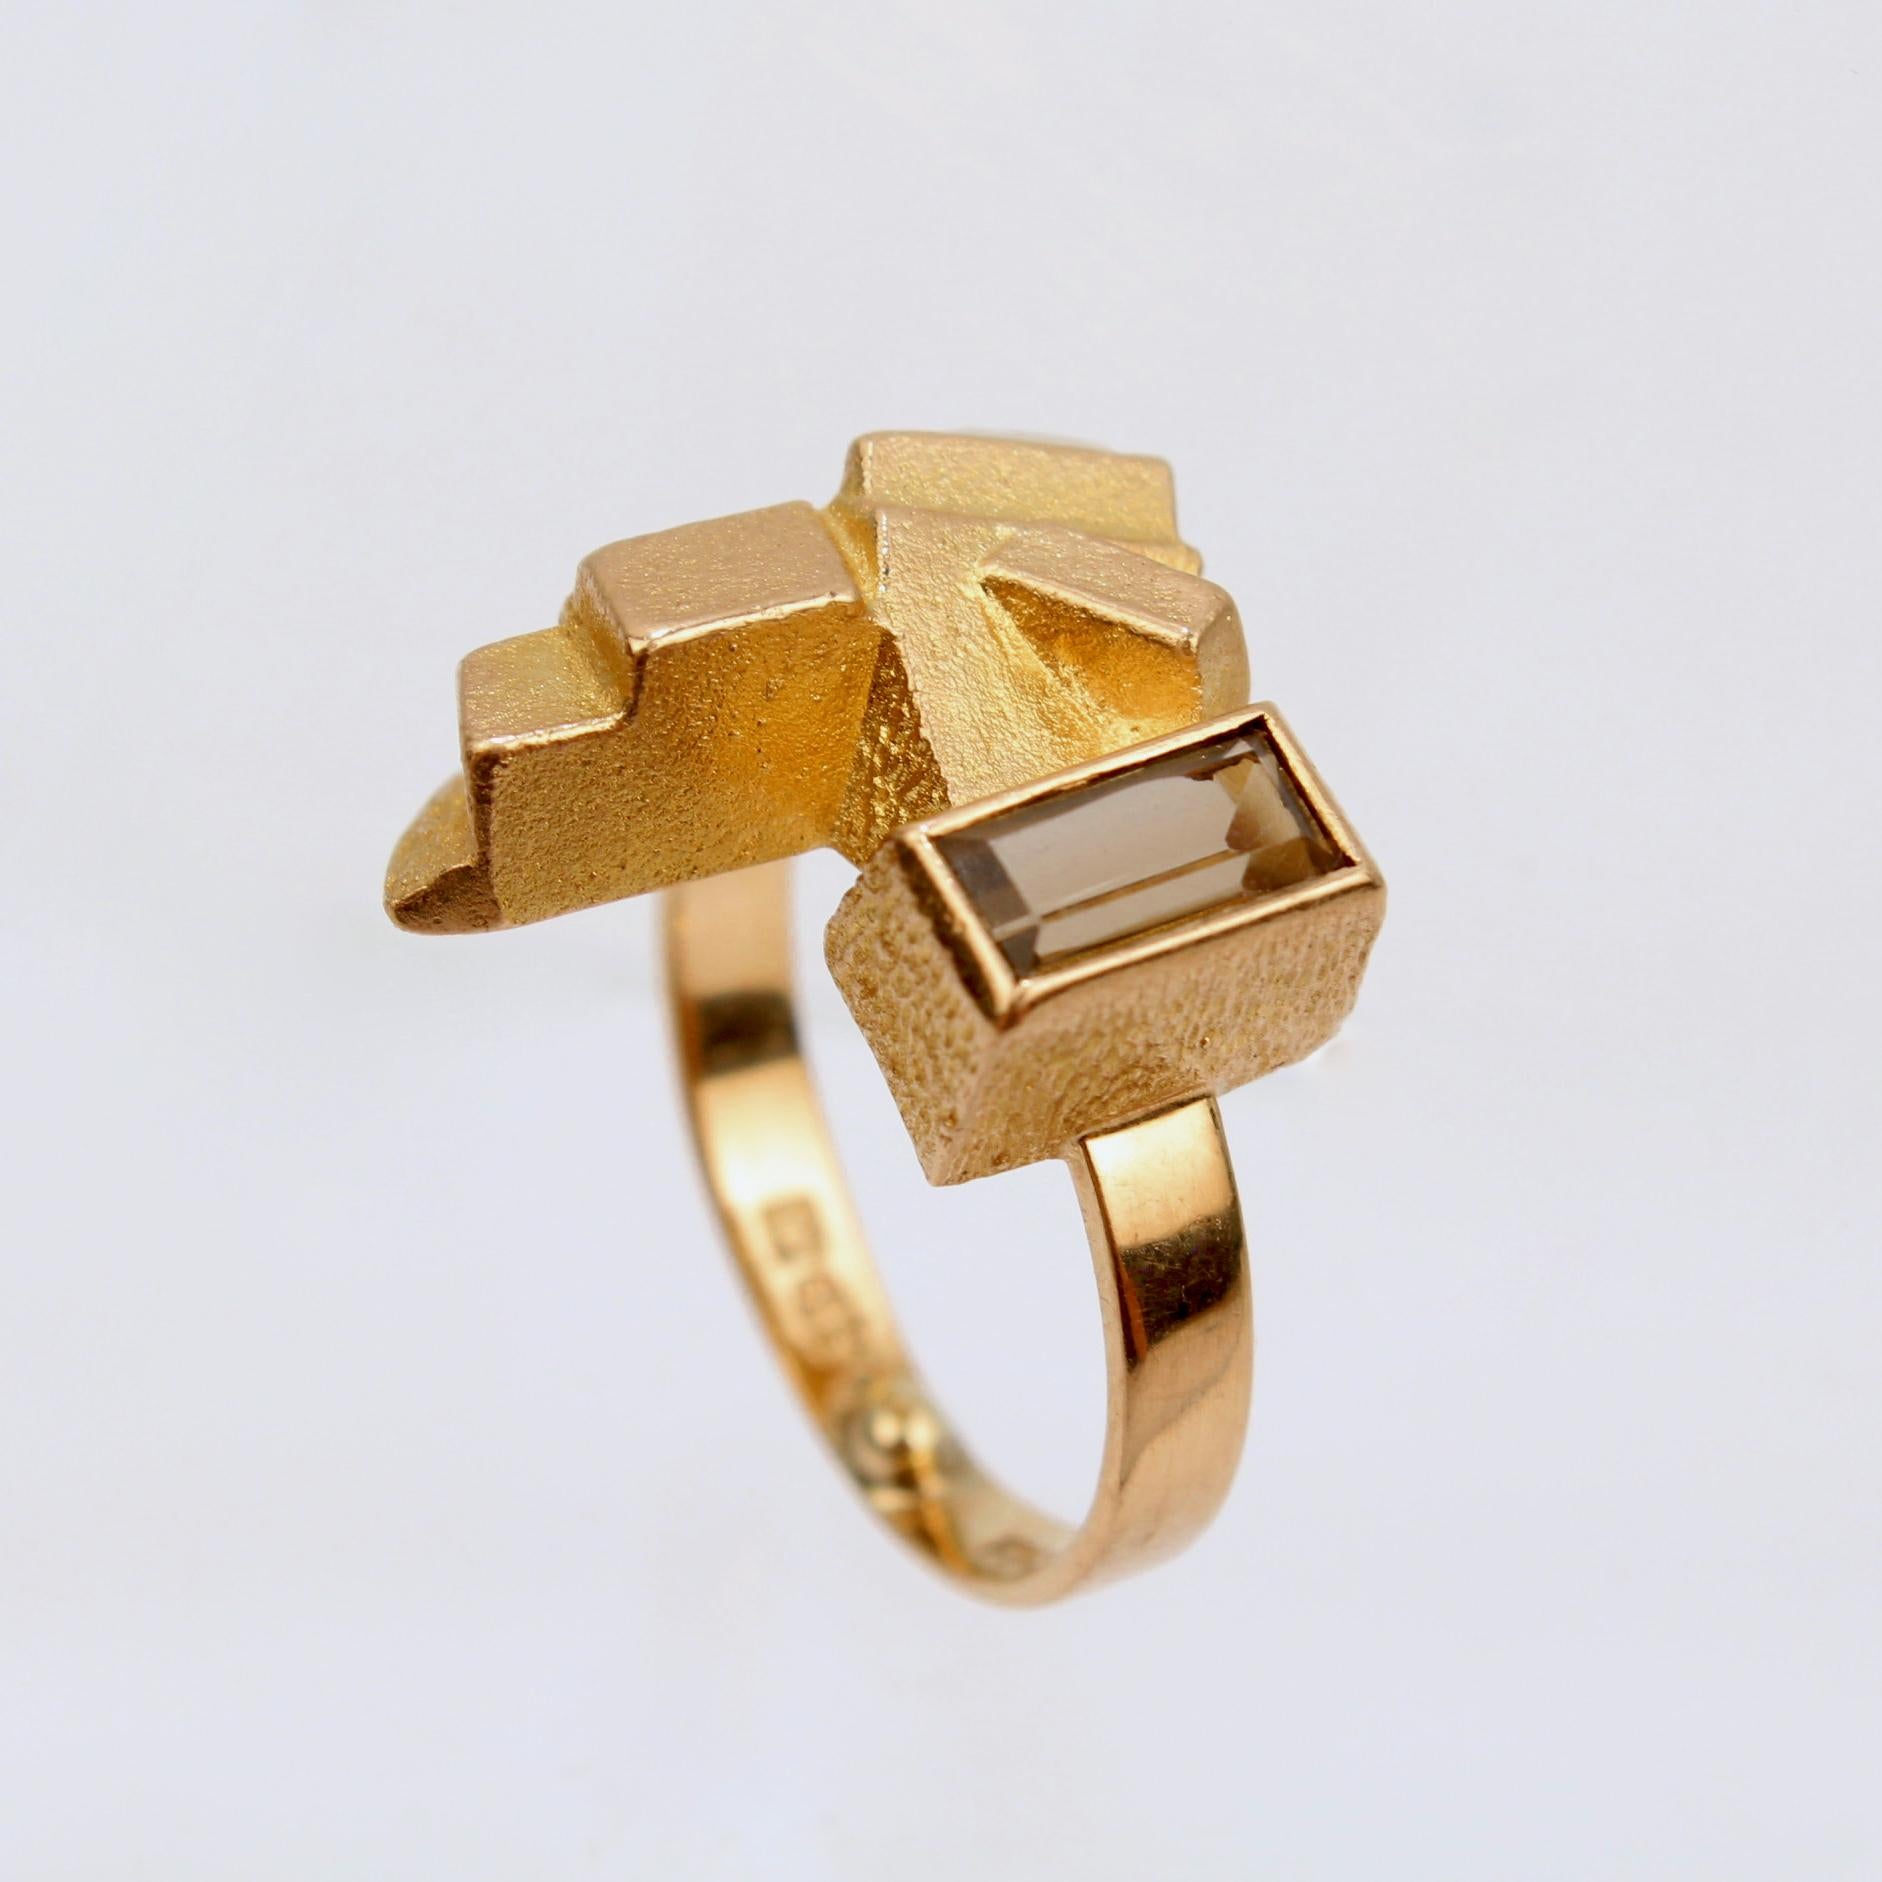 A very fine modernist Björn Weckström 14k gold and smoky quartz ring.

In 14k yellow gold with a layered cubist surface and with a bezel set smoky quartz emerald cut gemstone.

Weckström's work as designer and art director for Lapponia vaulted the